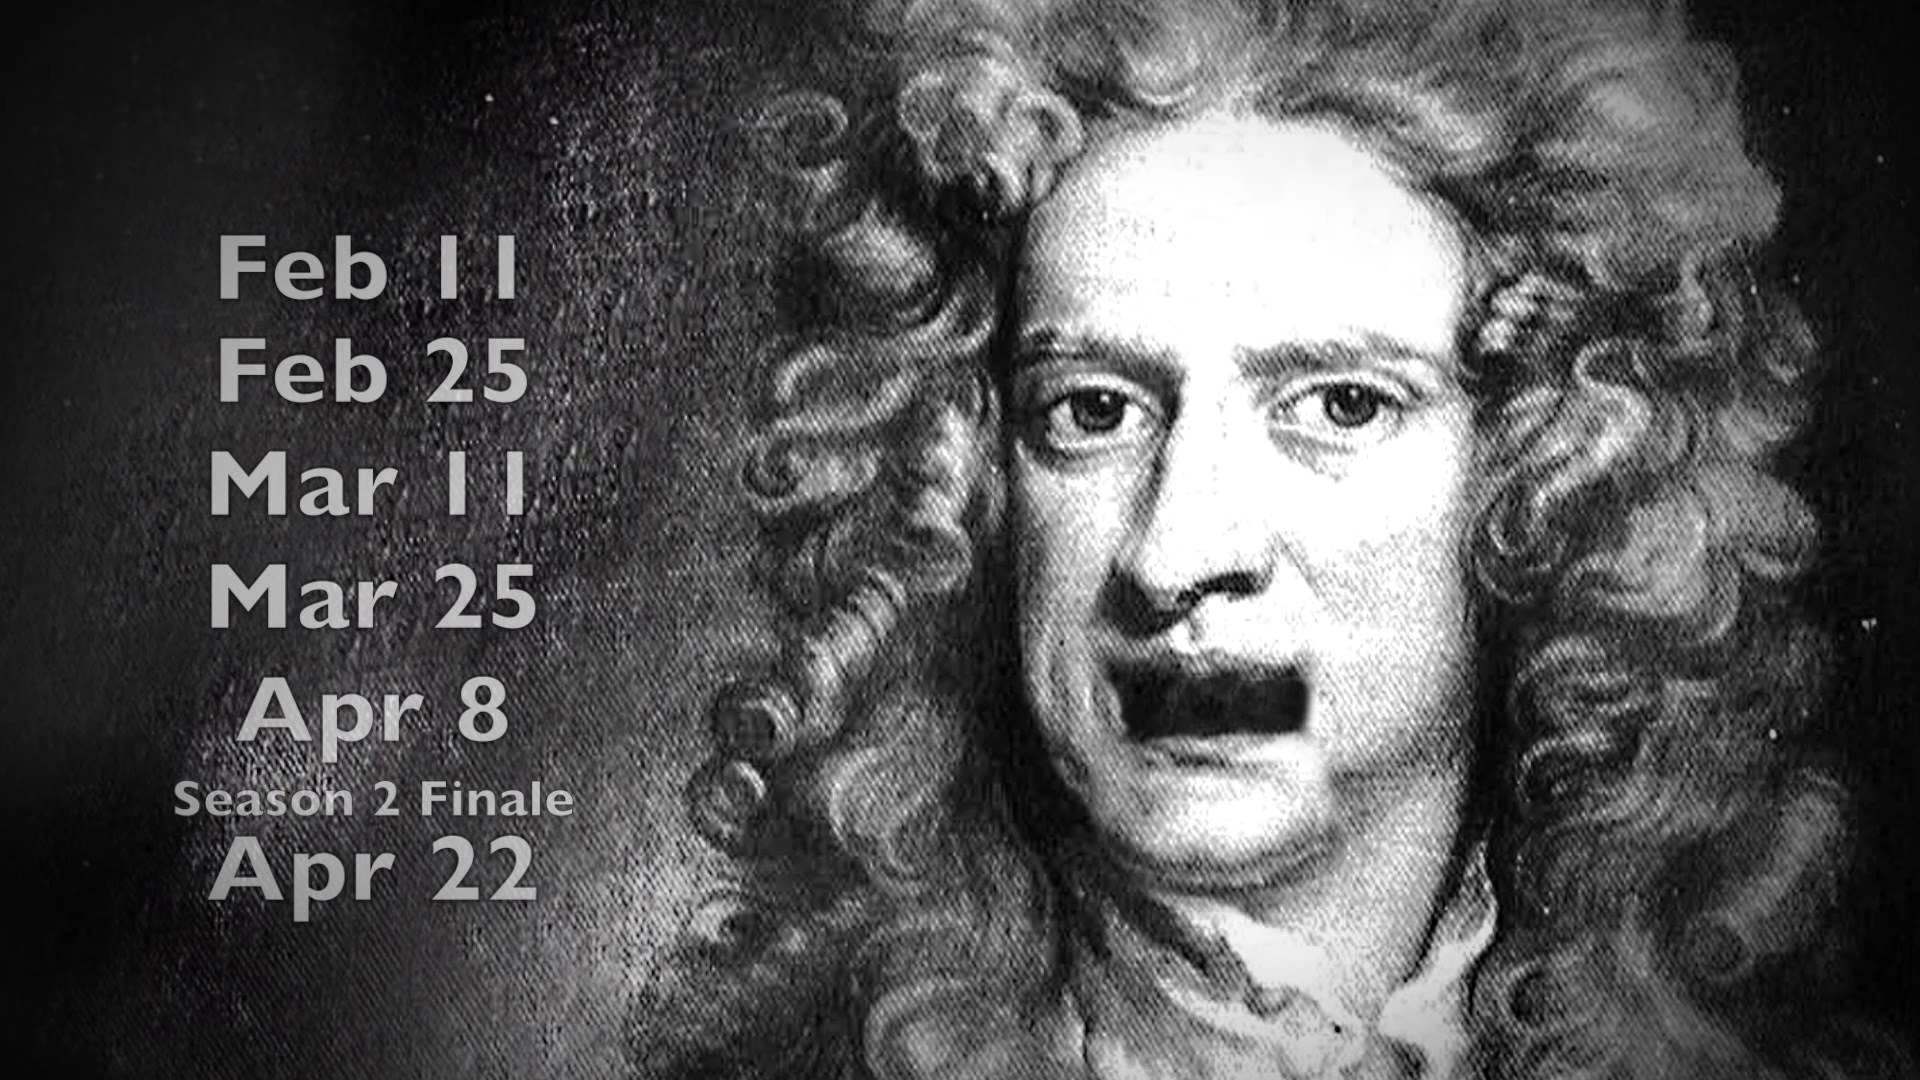 1920x1080 Epic Rap Battles of History News with Isaac Newton.